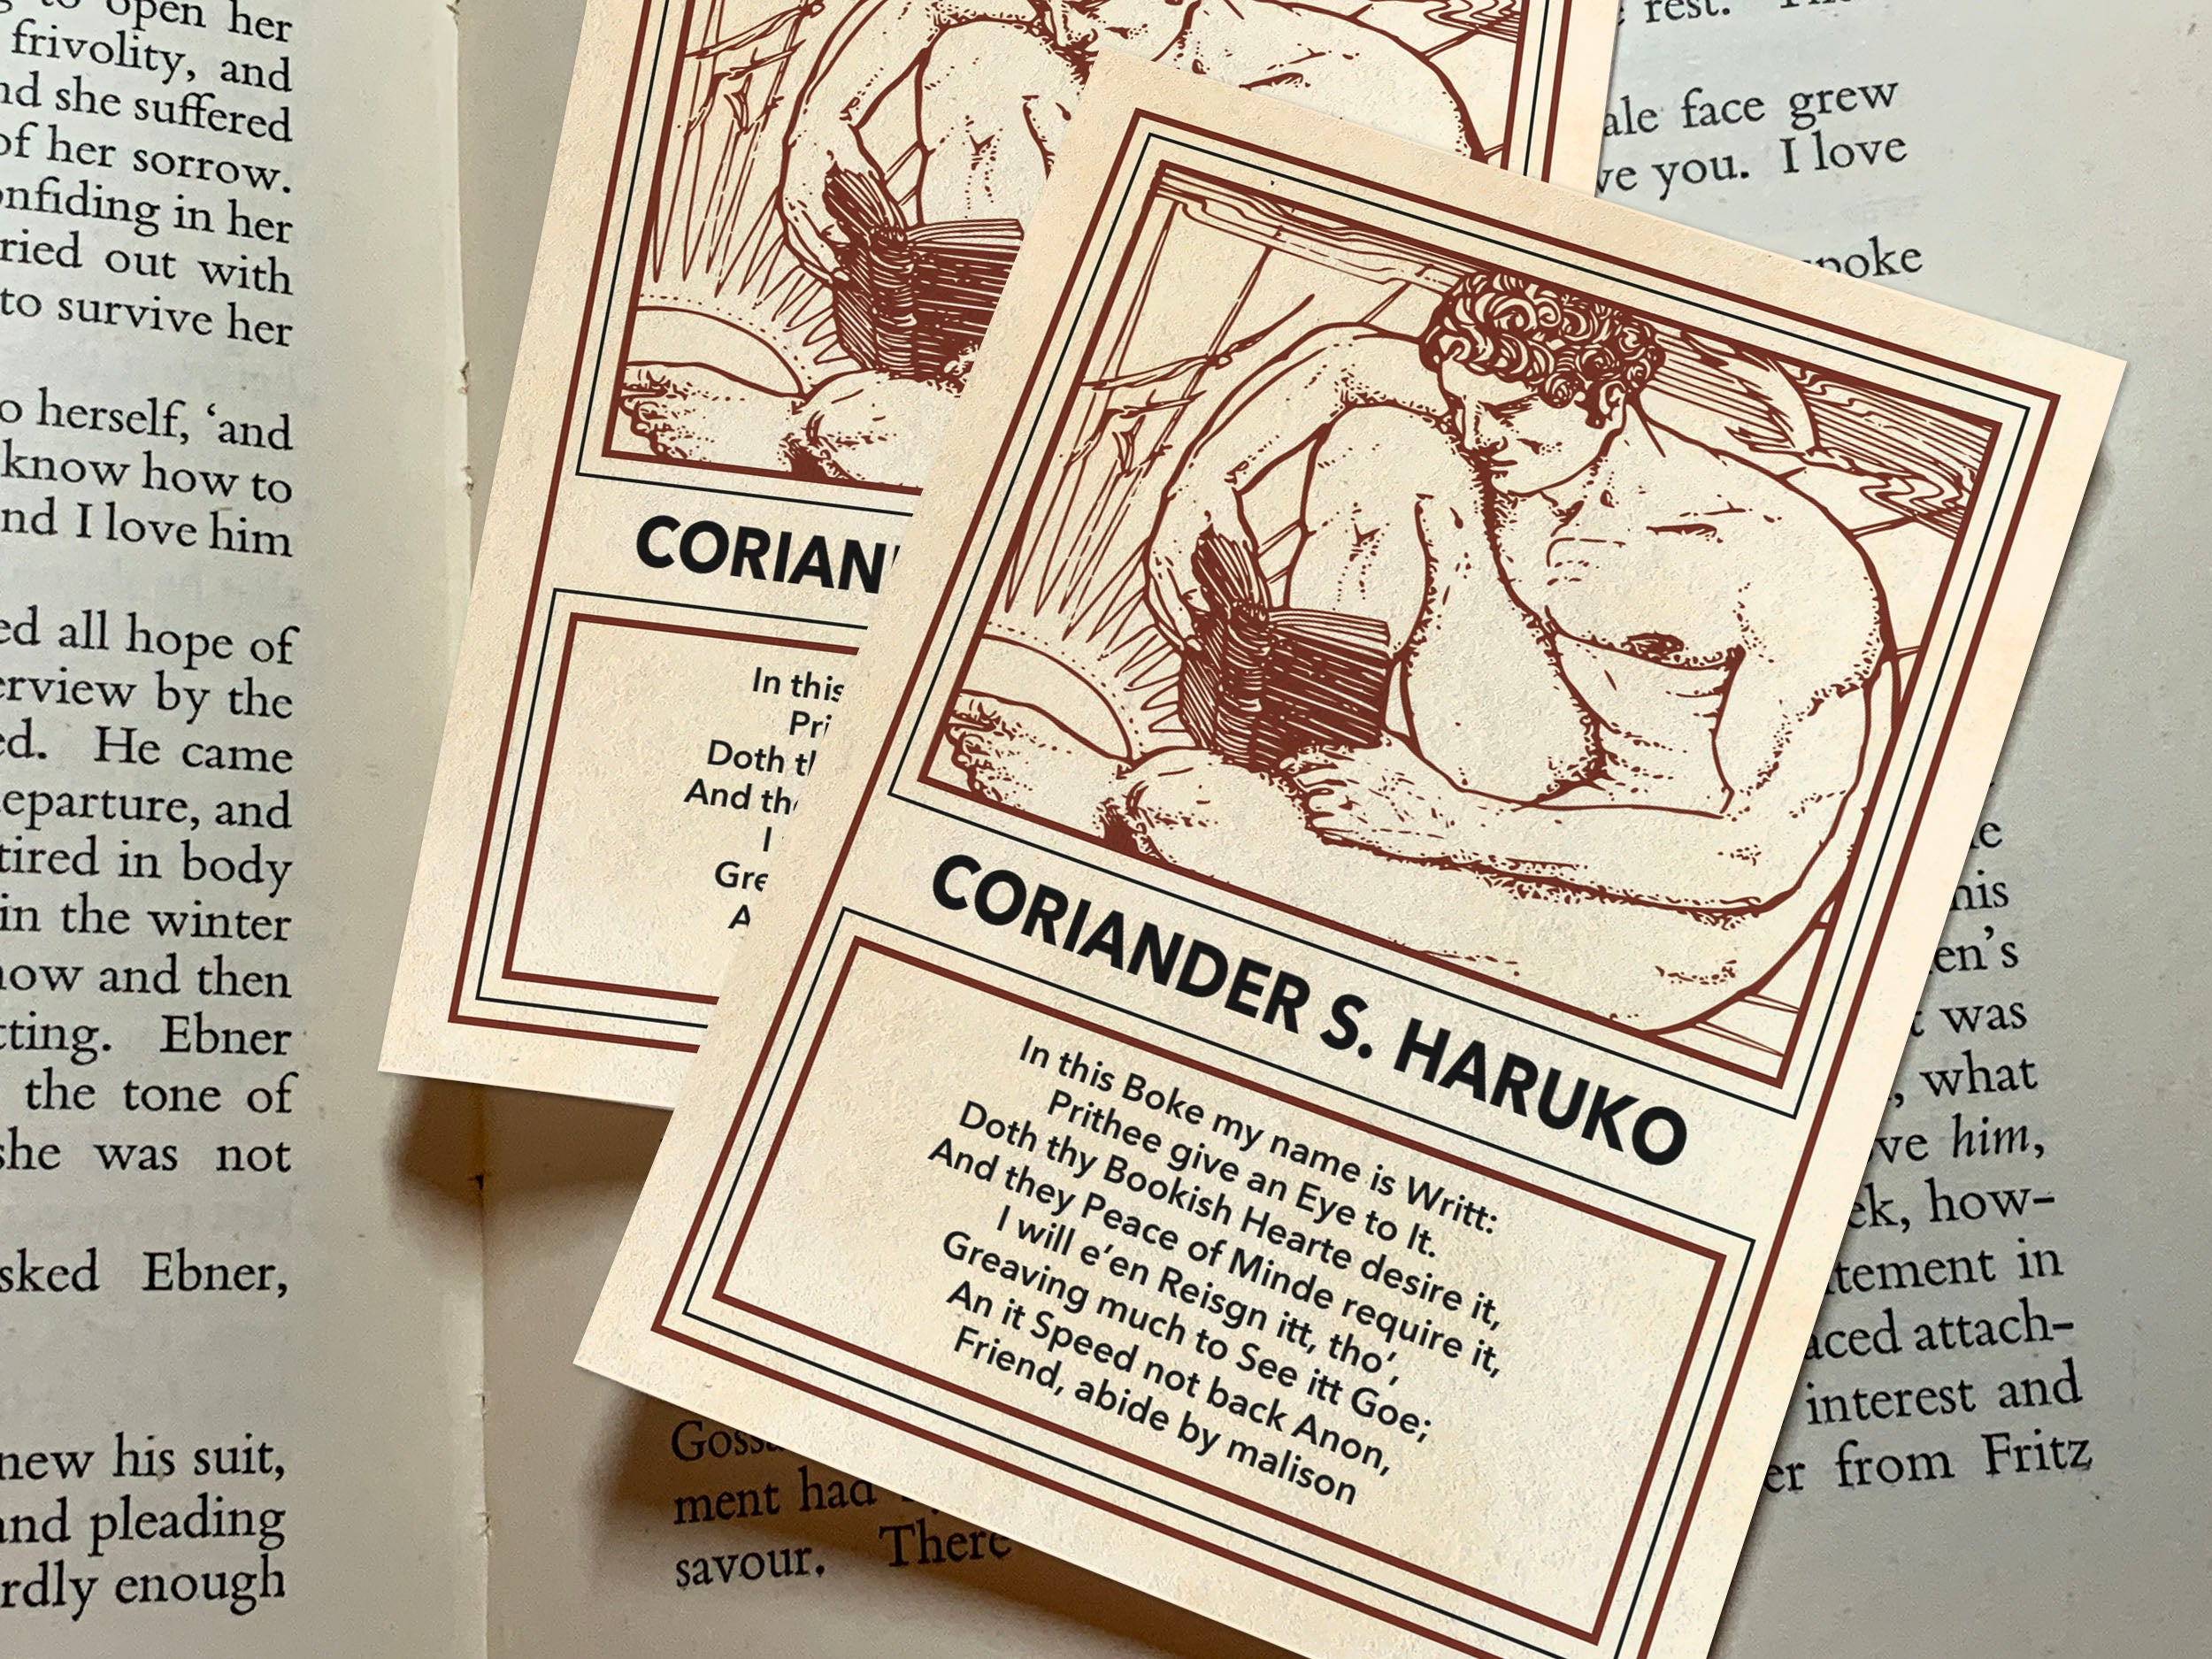 Seashore Adonis, Personalized Erotic Ex-Libris Bookplates, Crafted on Traditional Gummed Paper, 3in x 4in, Set of 30